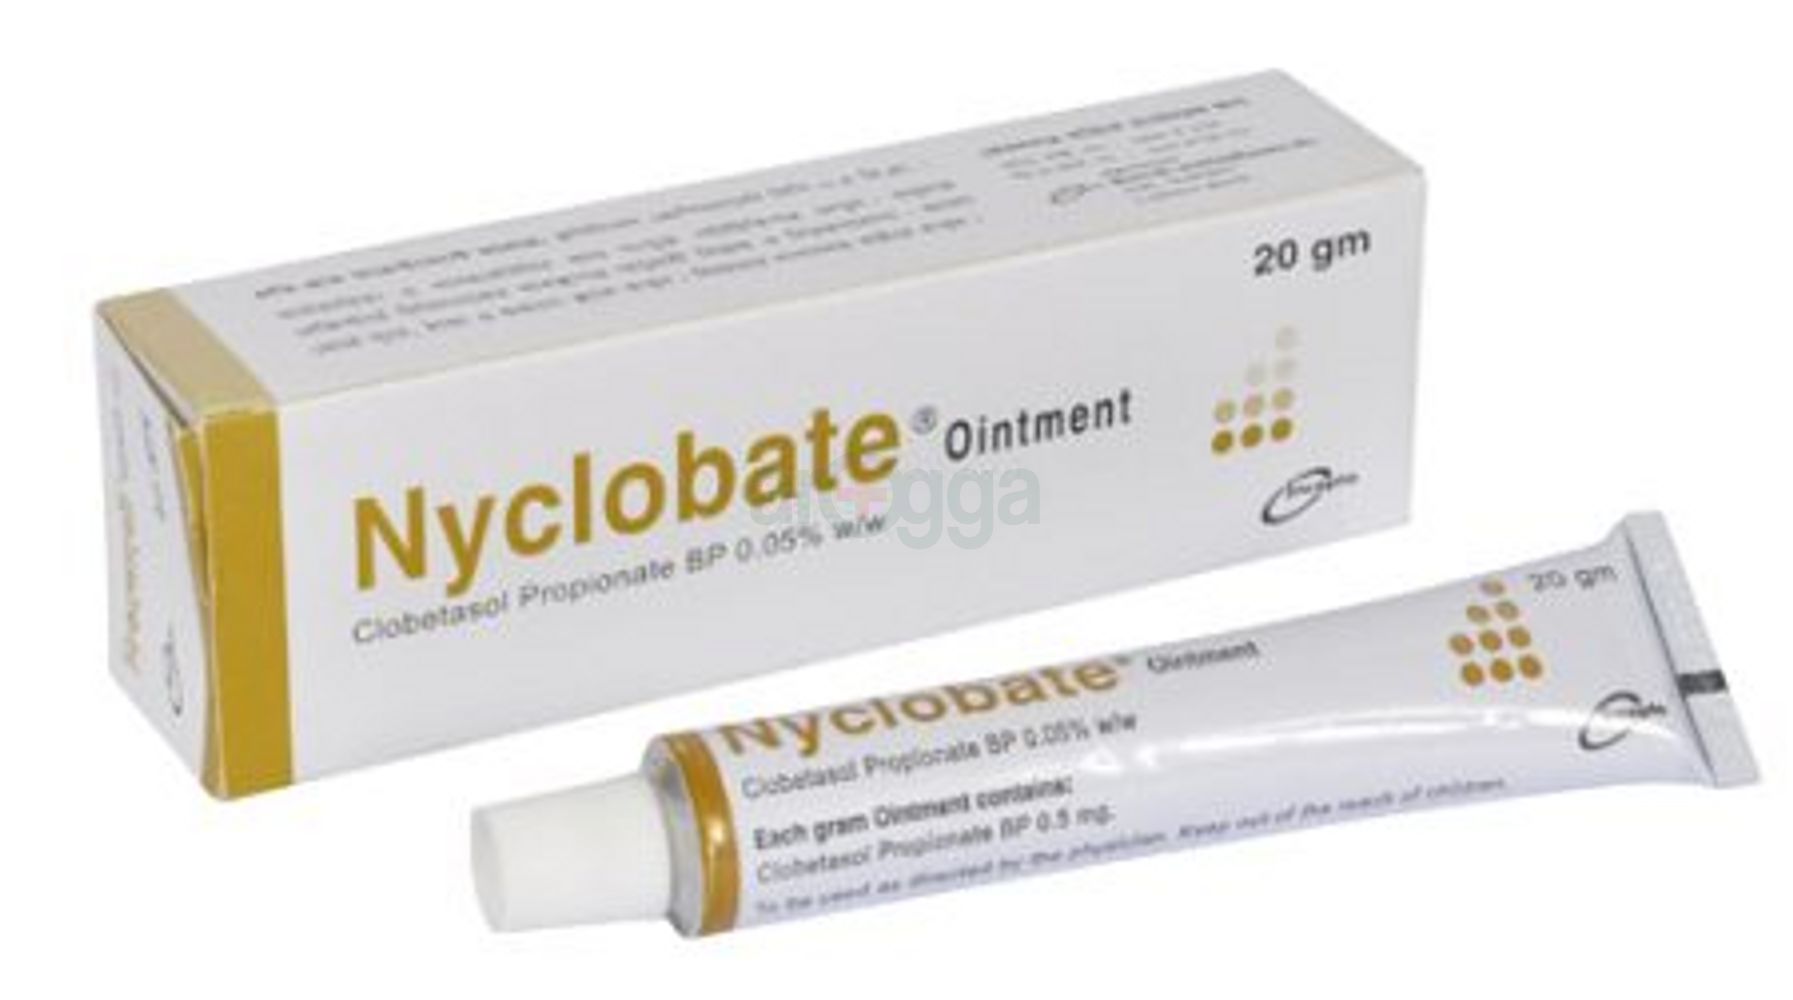 Nyclobate Ointment 20gm